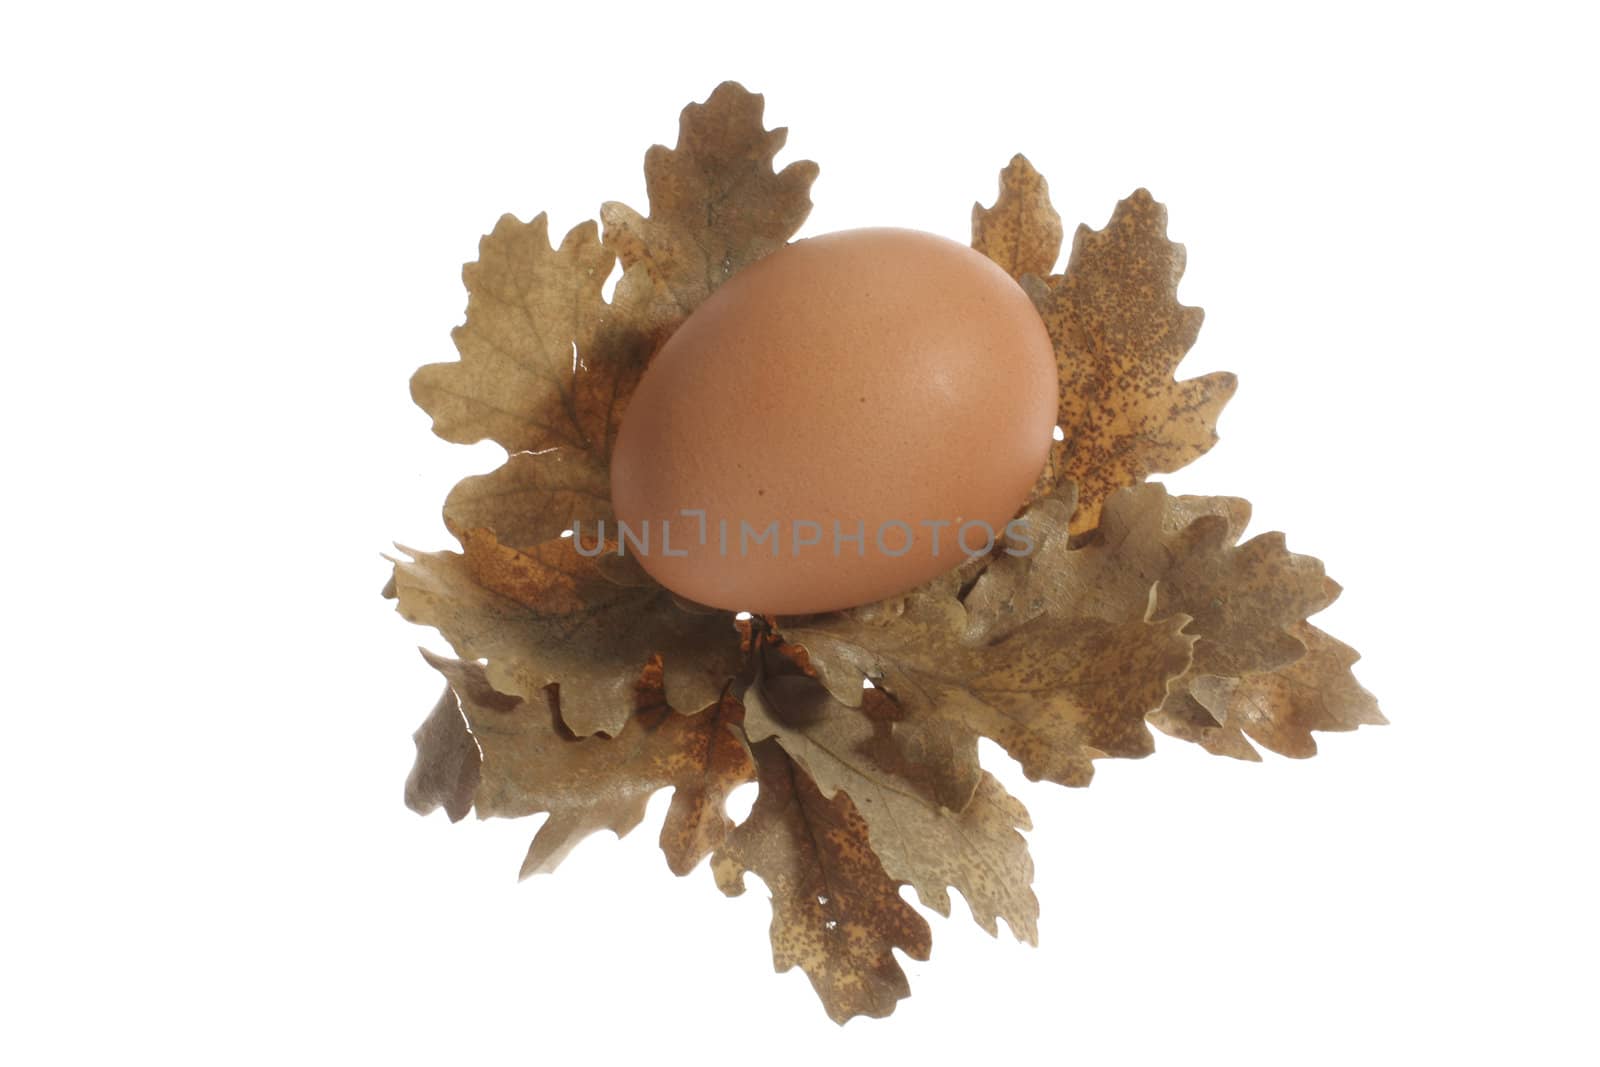 An egg isolated in white